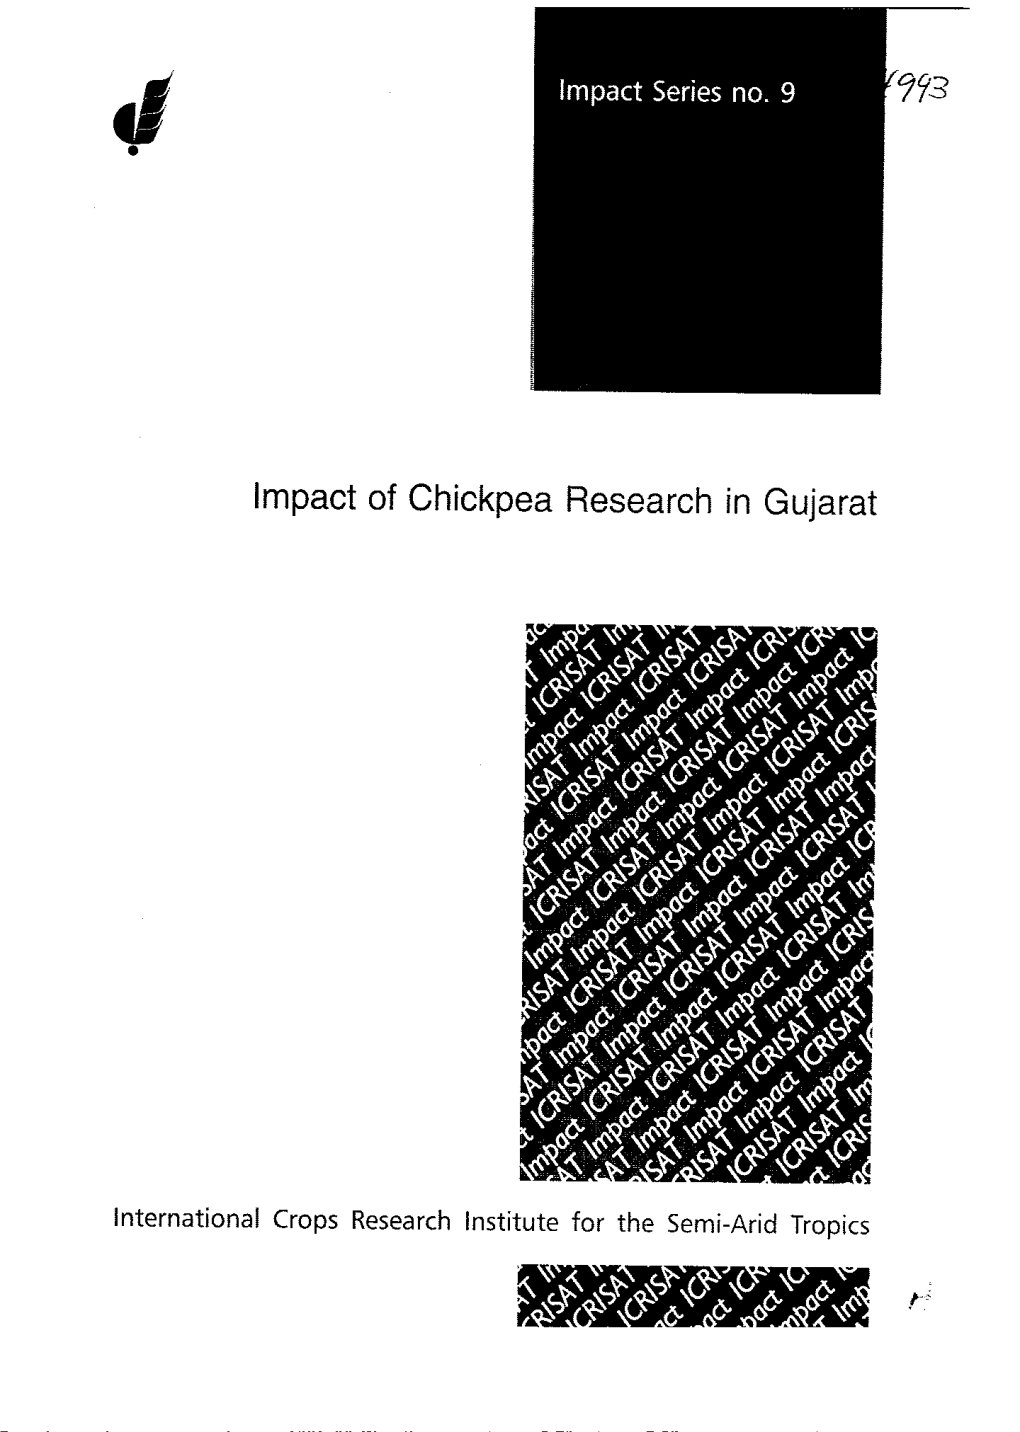 Impact of Chickpea Research in Gujarat